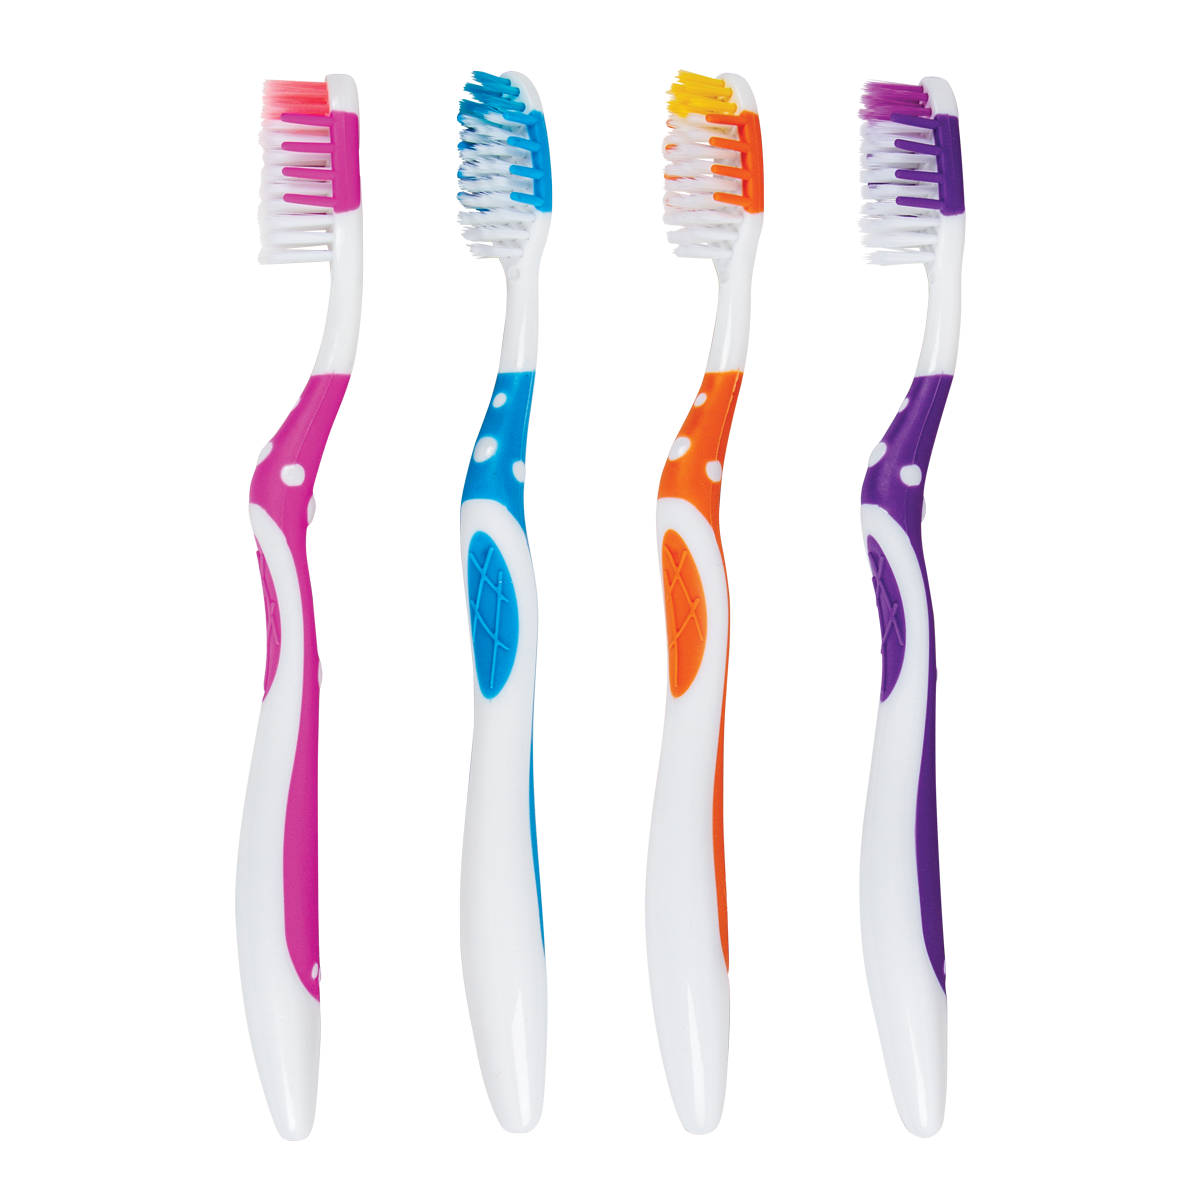 SmartSmile Adult Toothbrushes